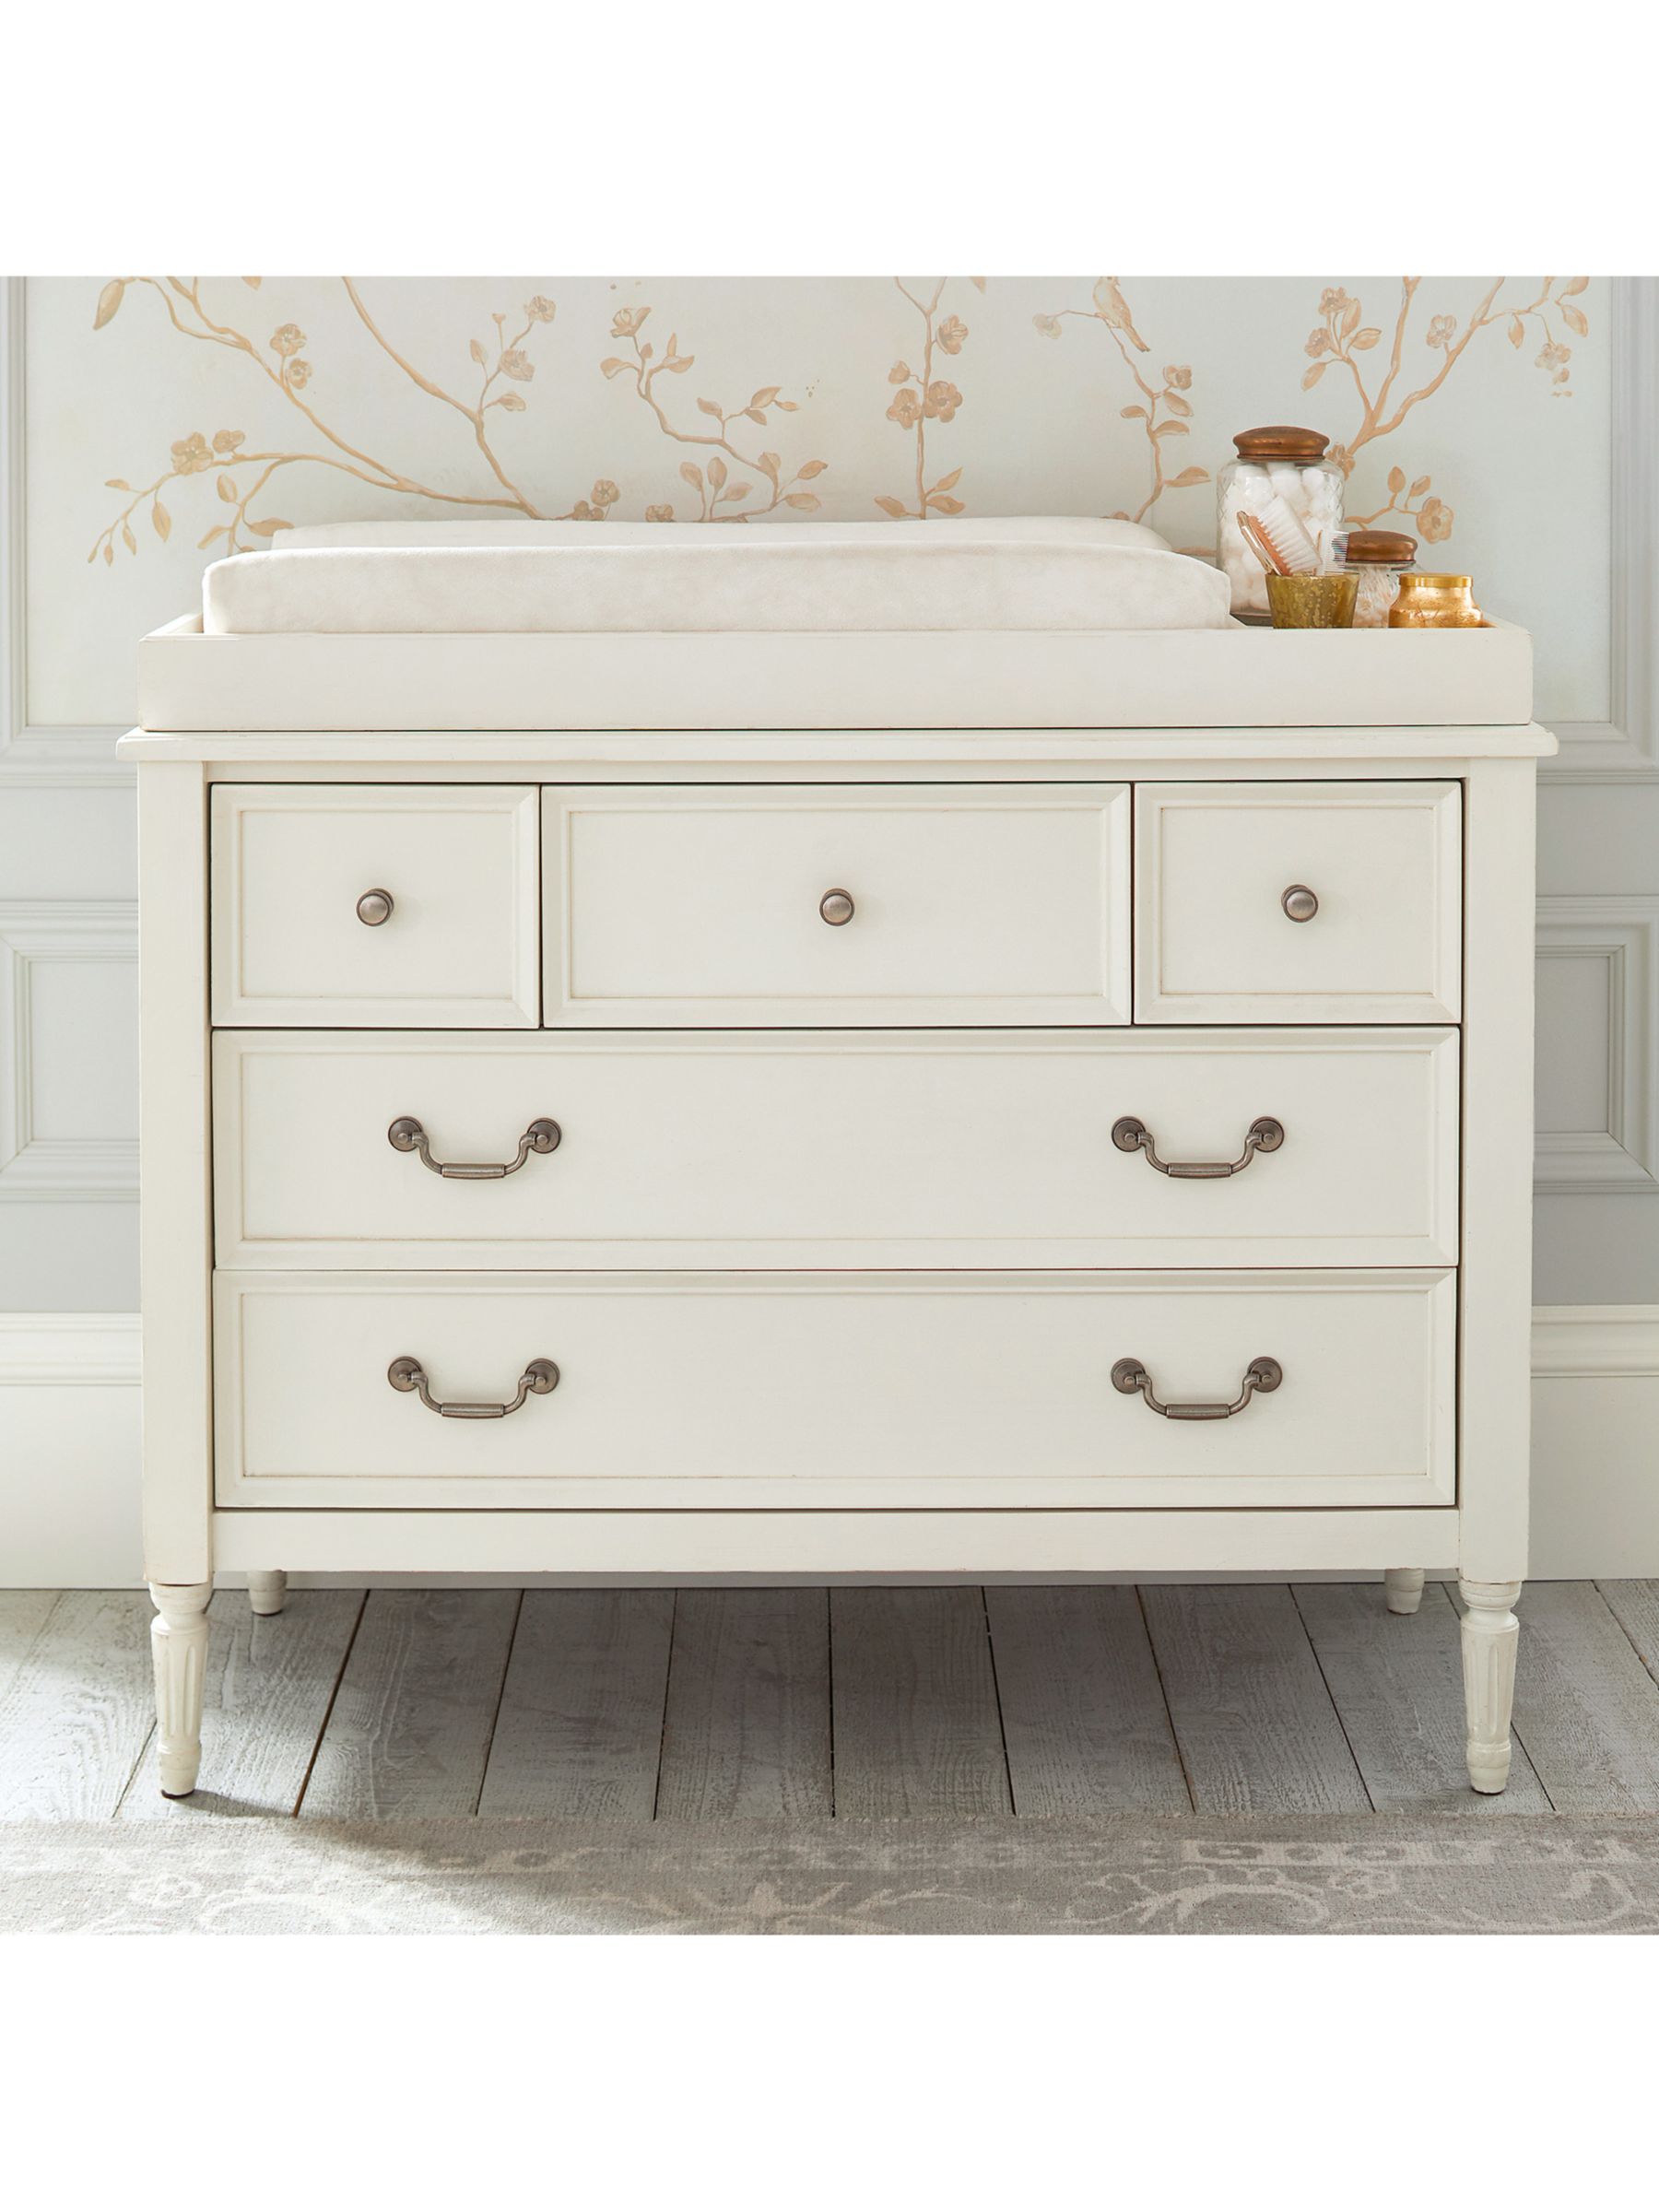 kids changing table